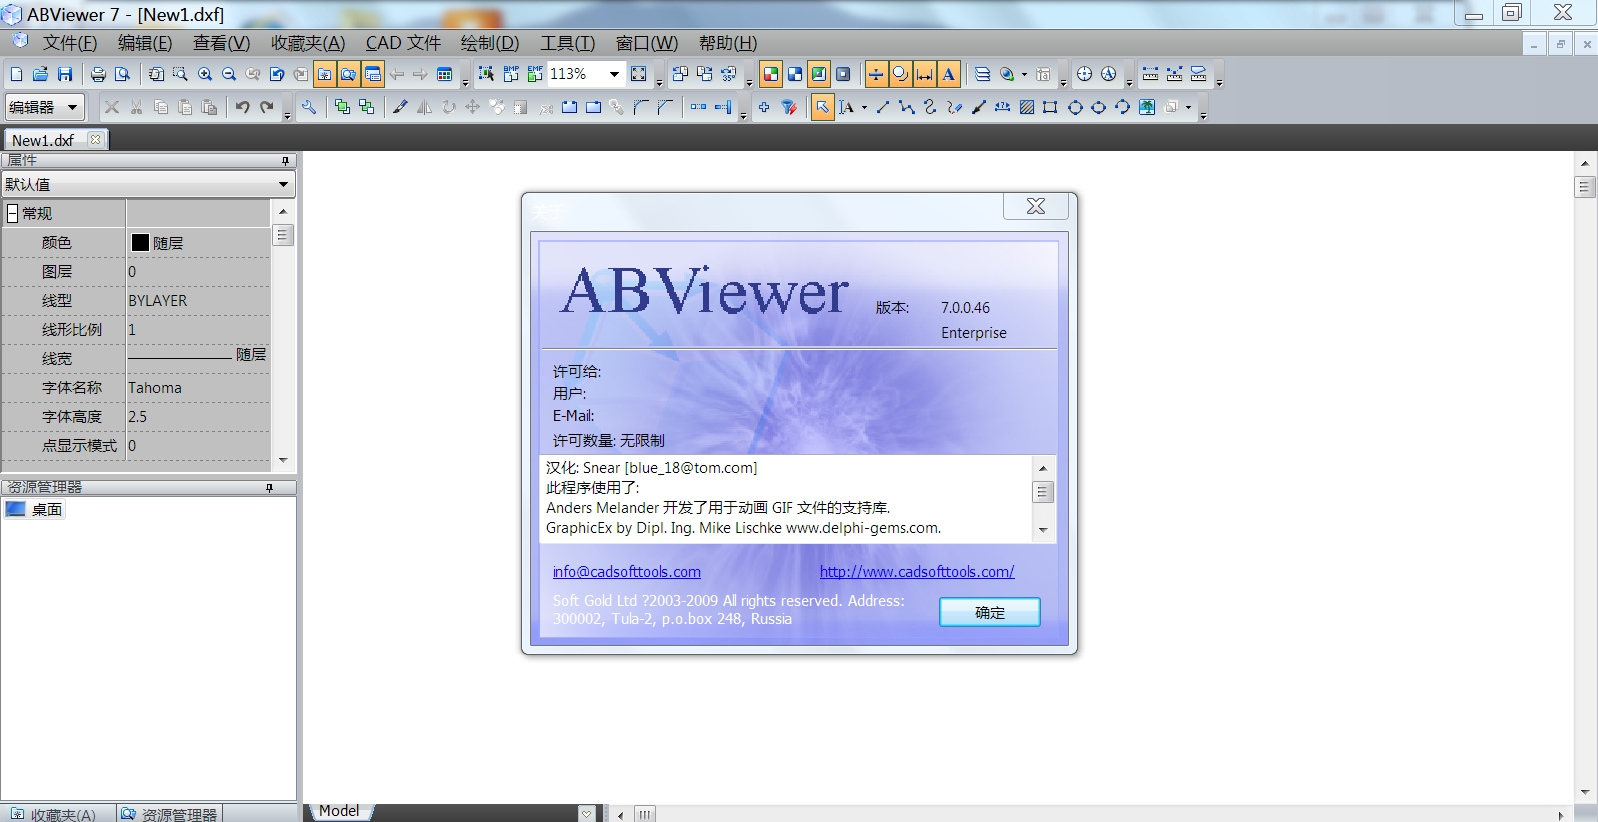 download the new ABViewer 15.1.0.7